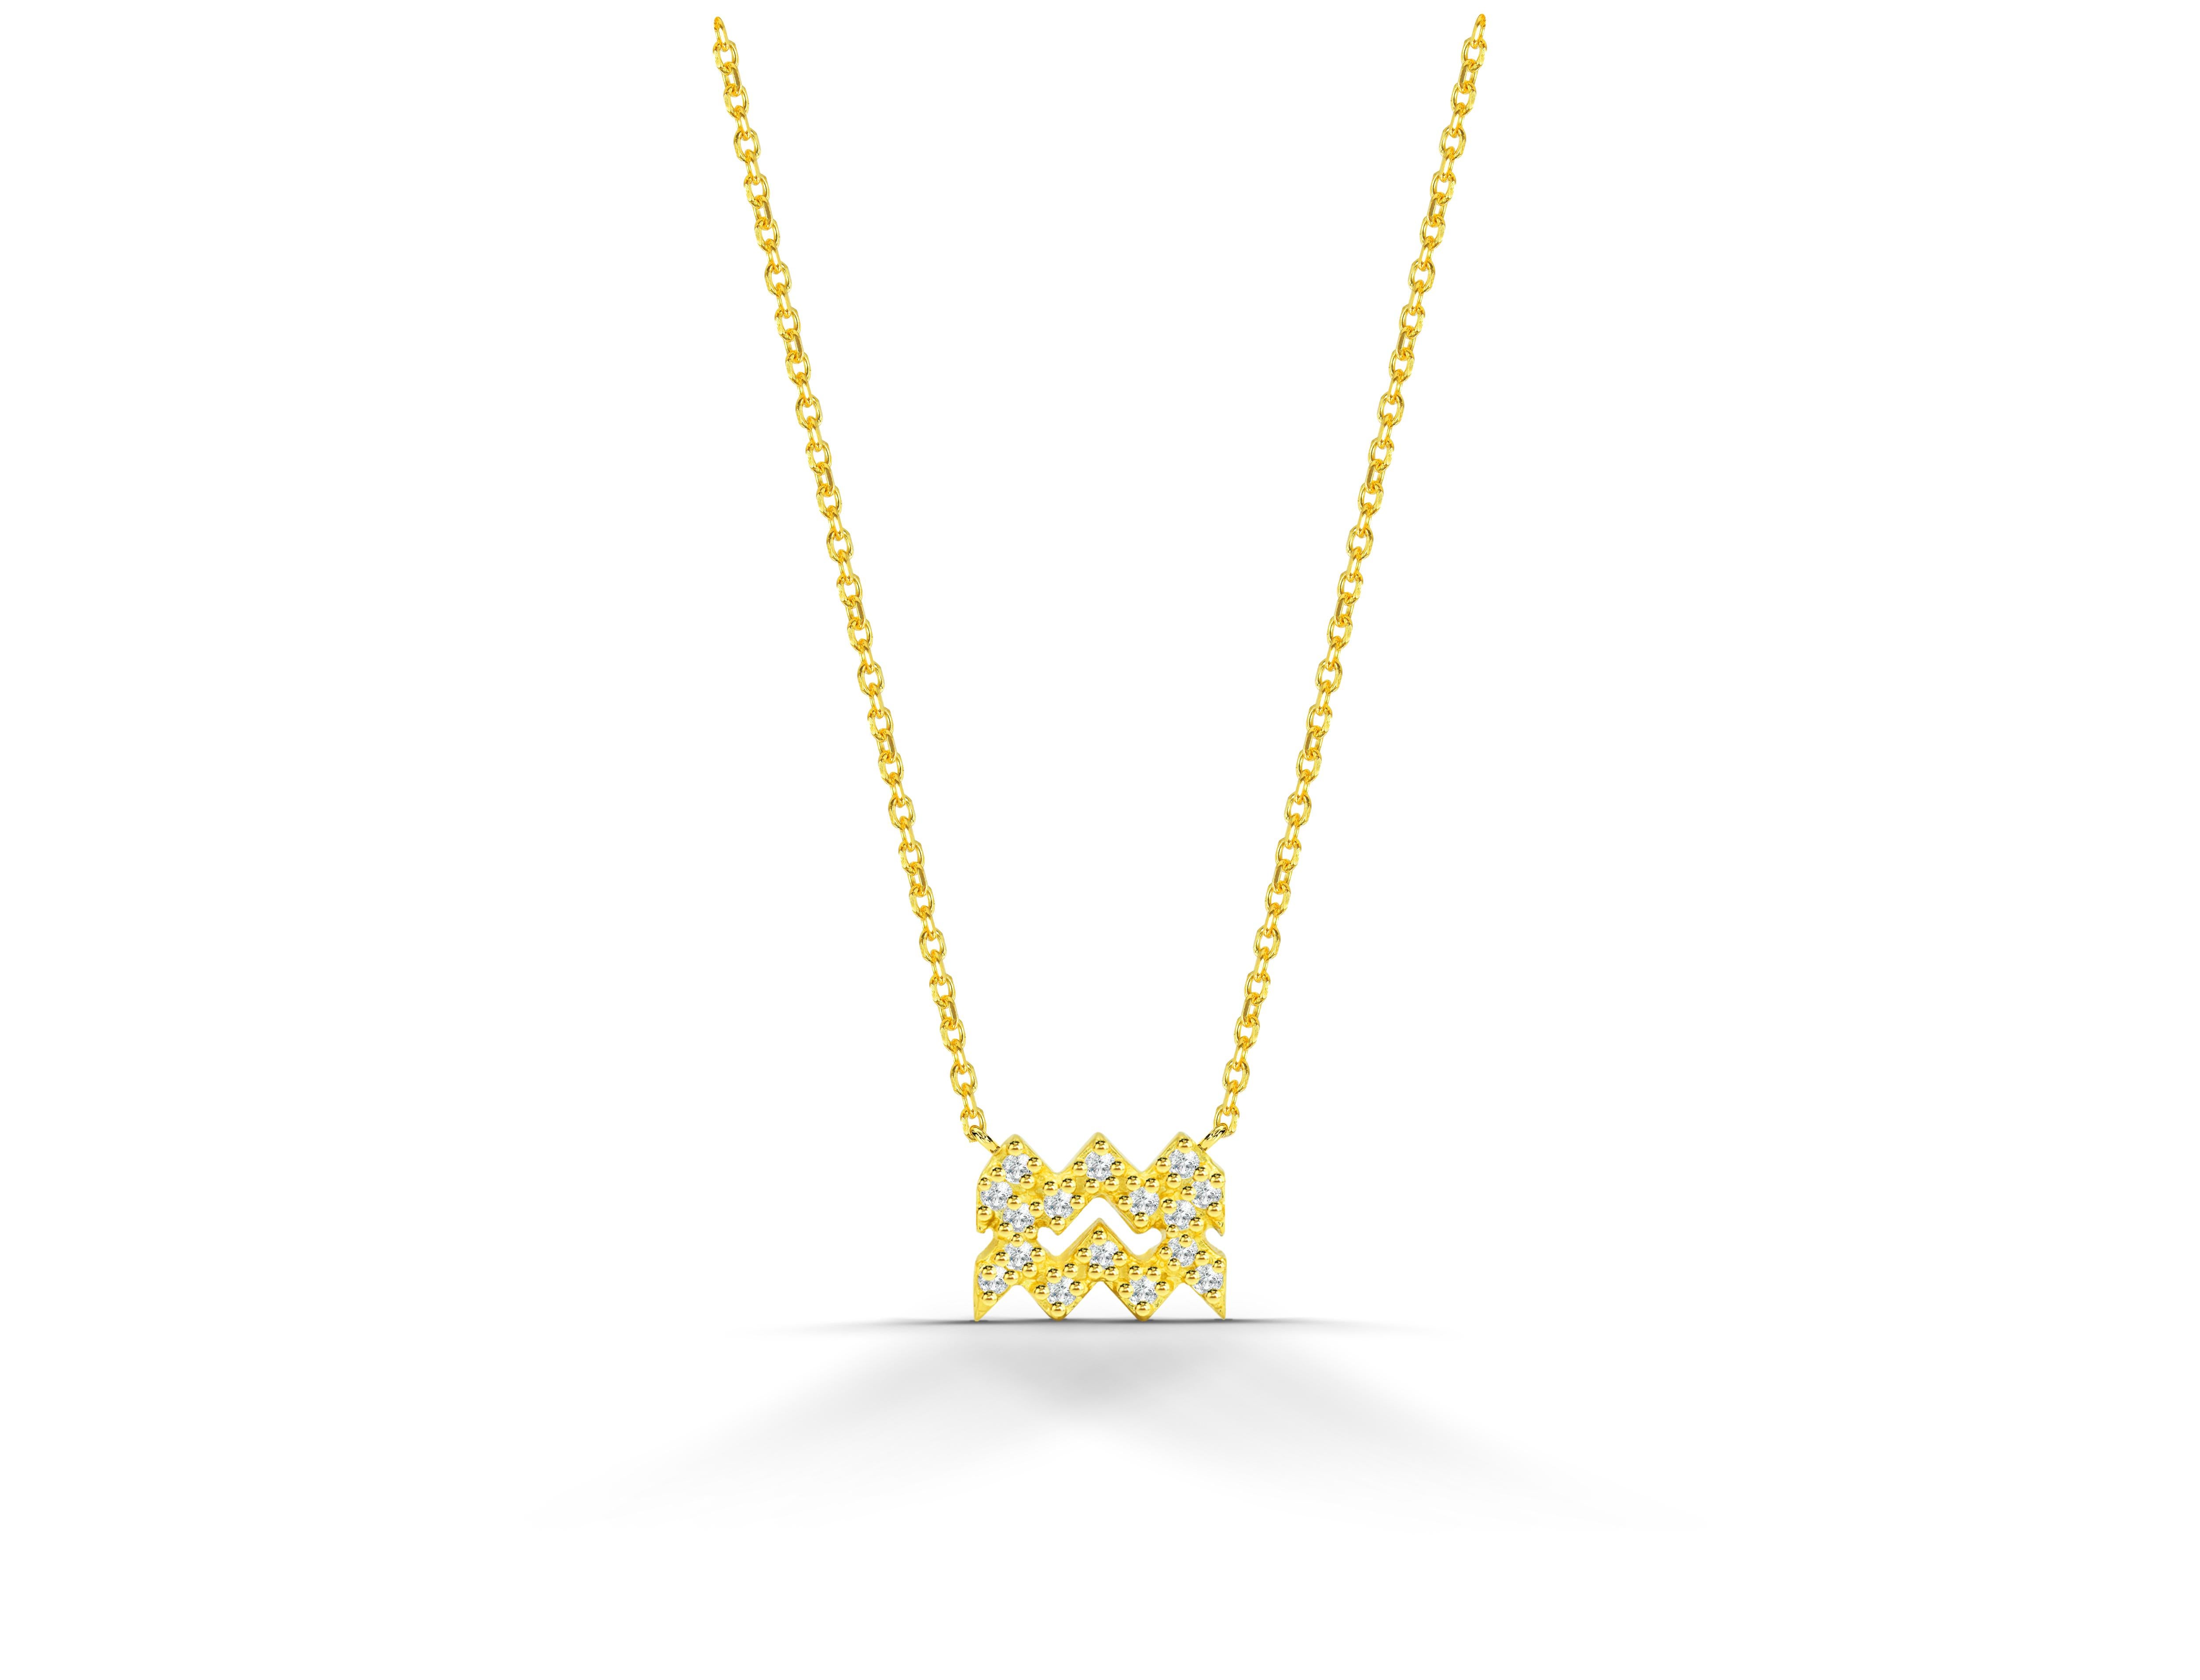 Beautiful and Sparkly Diamond Aquarius Necklace made of 18k solid gold.
Available in three colors of gold:  Yellow Gold / White Gold / Rose Gold.

Natural genuine round cut diamond each diamond is hand selected by me to ensure quality and set by a